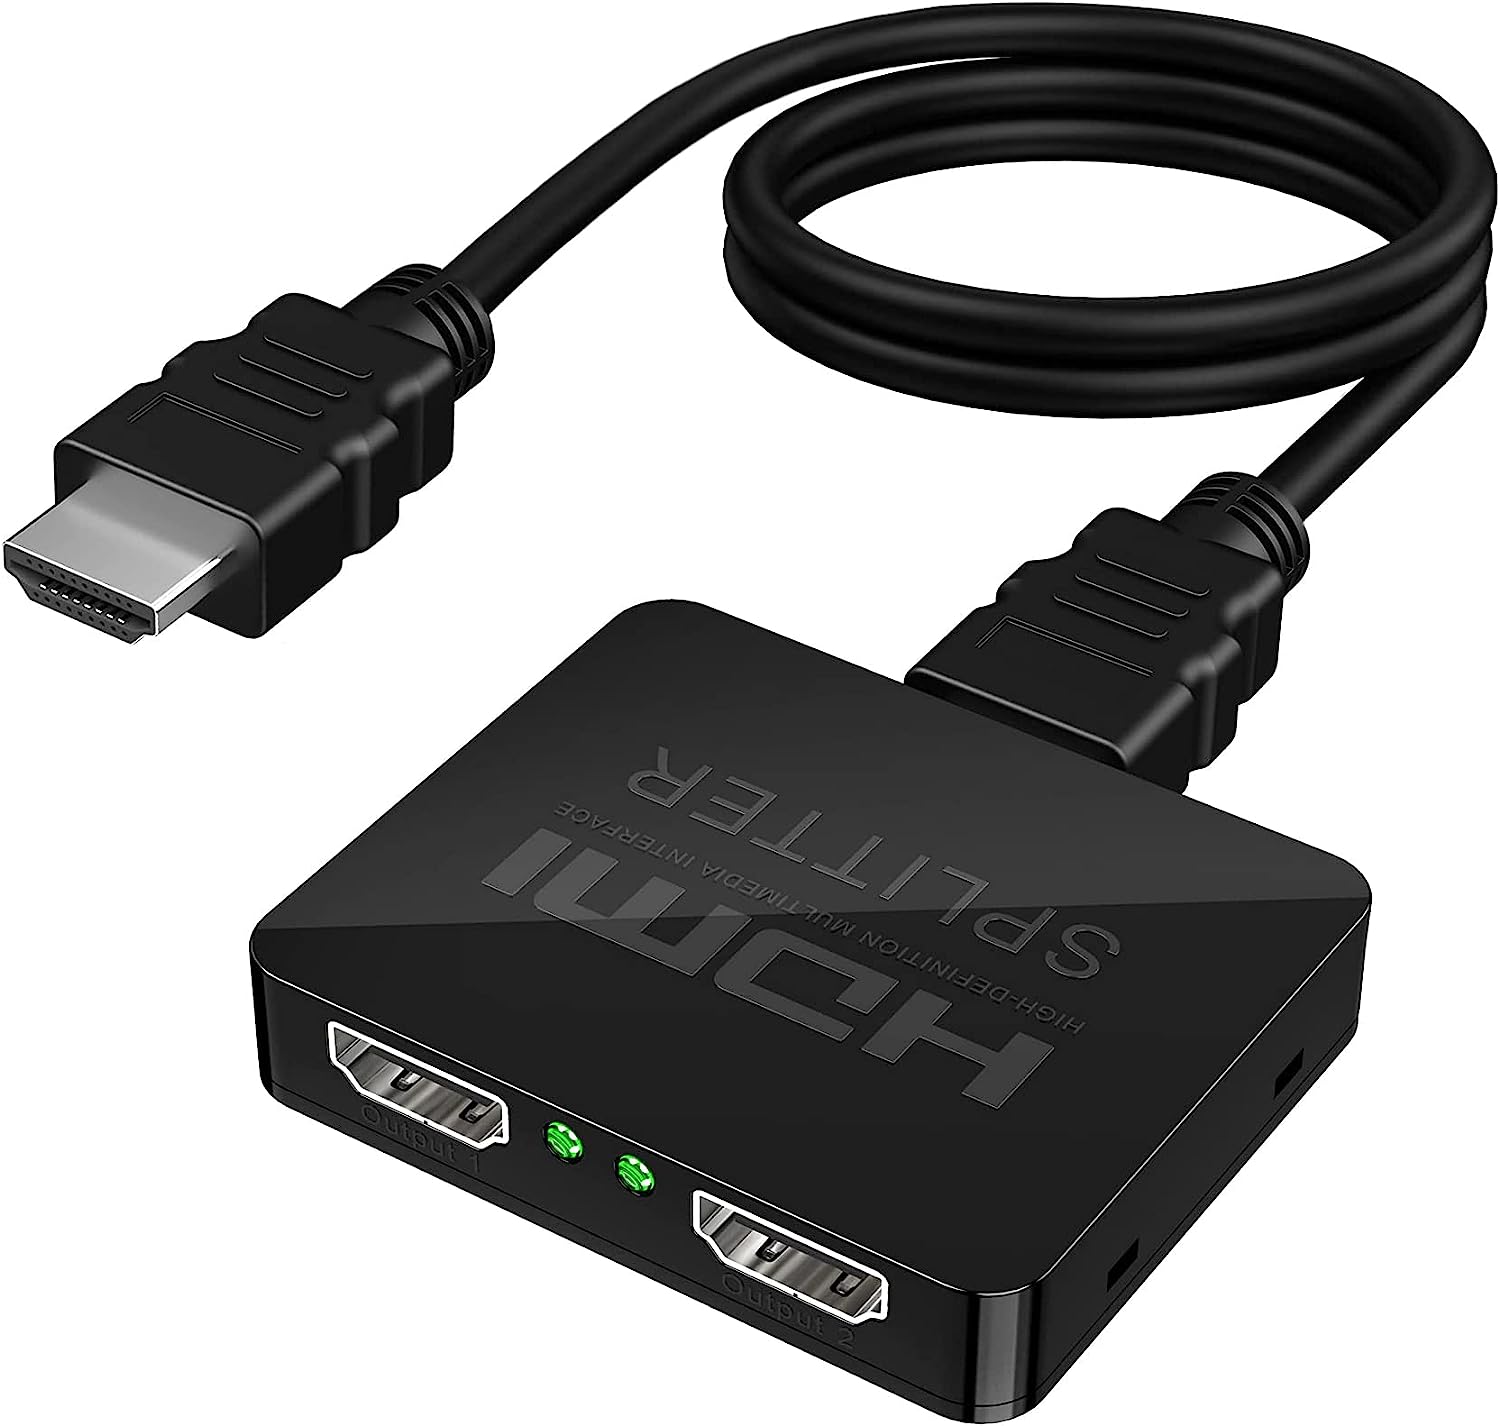 HDMI Splitter 1 in 2 Out 4K@60Hz with HDMI Cable, [...]